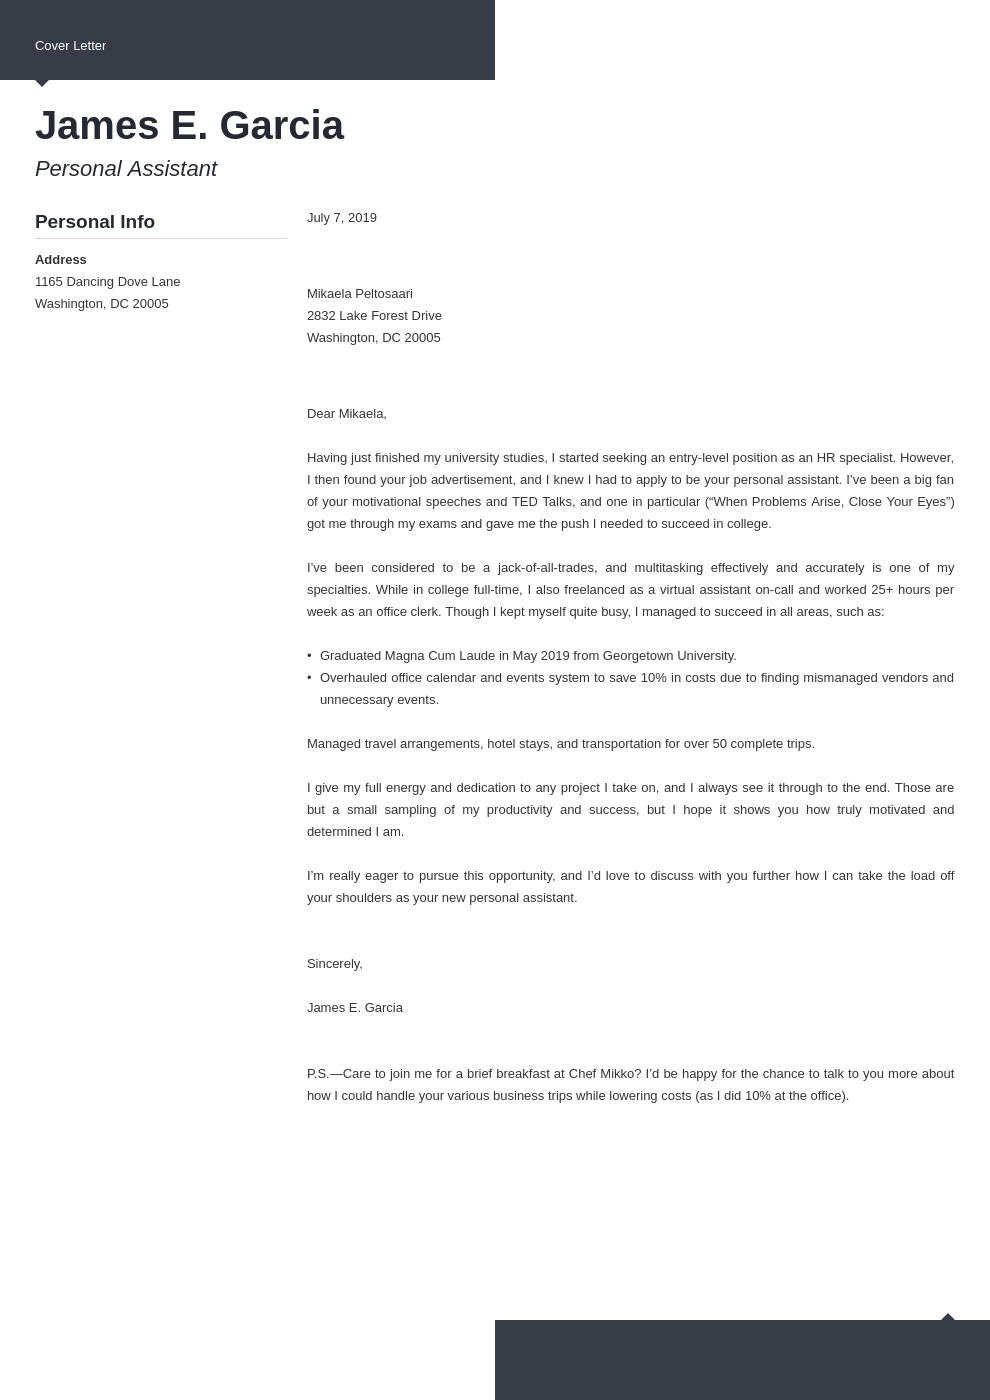 5-latex-cover-letter-templates-for-any-job